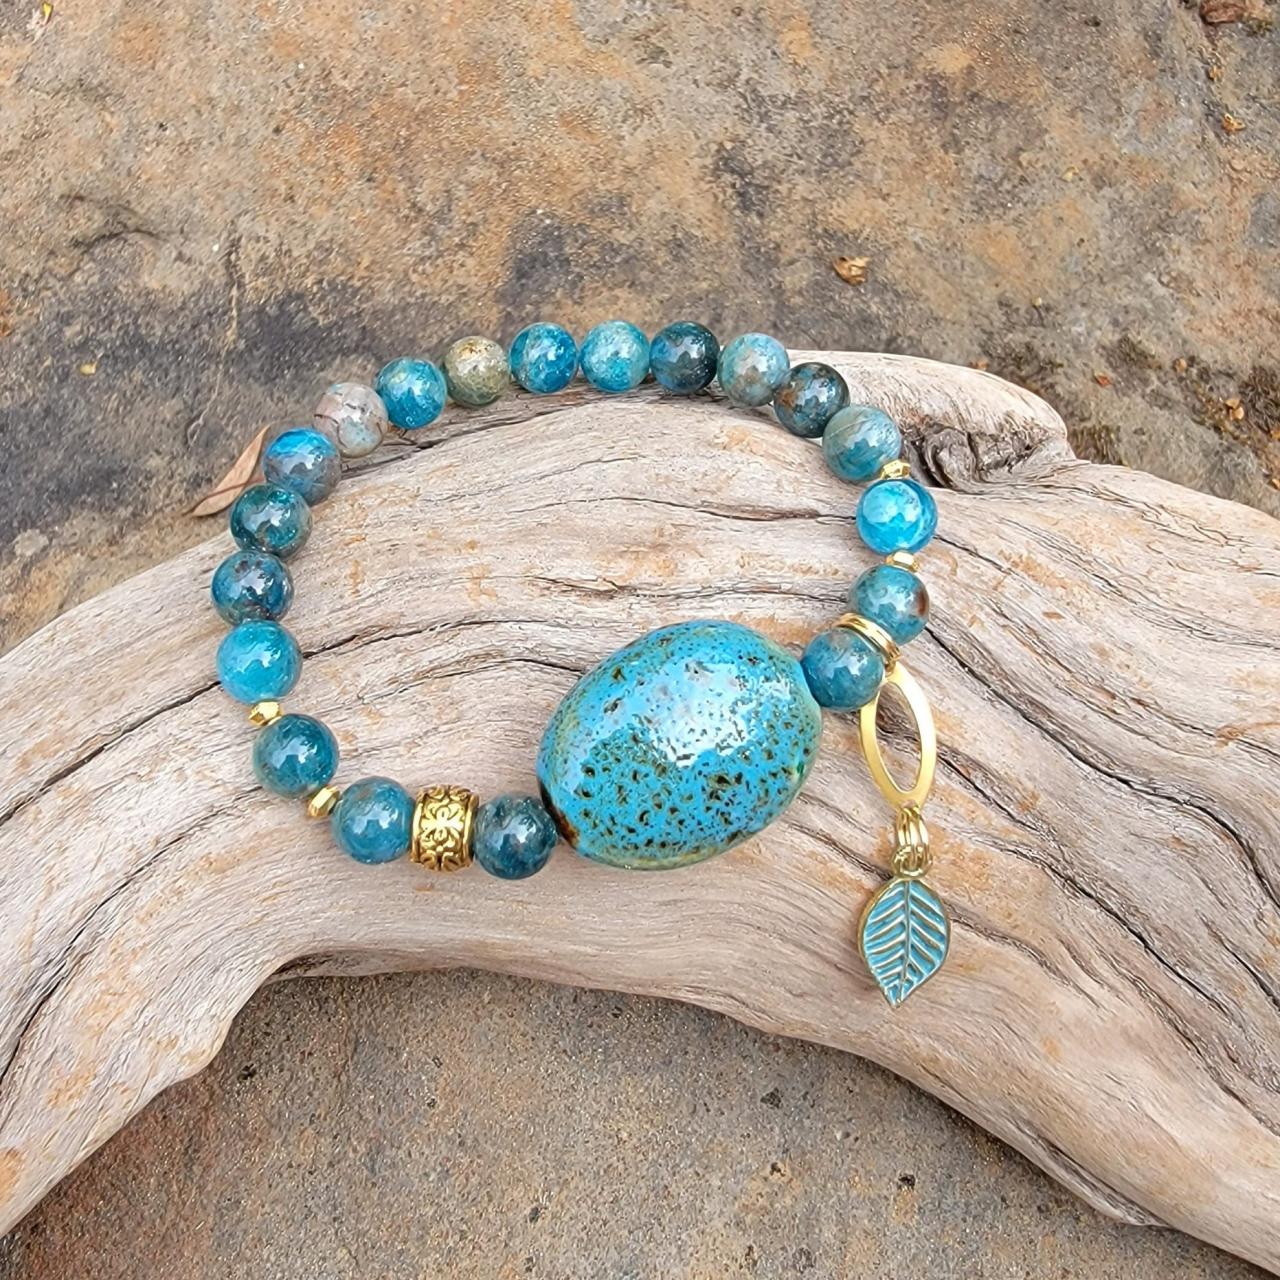 Apatite Natural Healing Gemstone Bracelet With Large Ceramic Bead And Leaf Charm